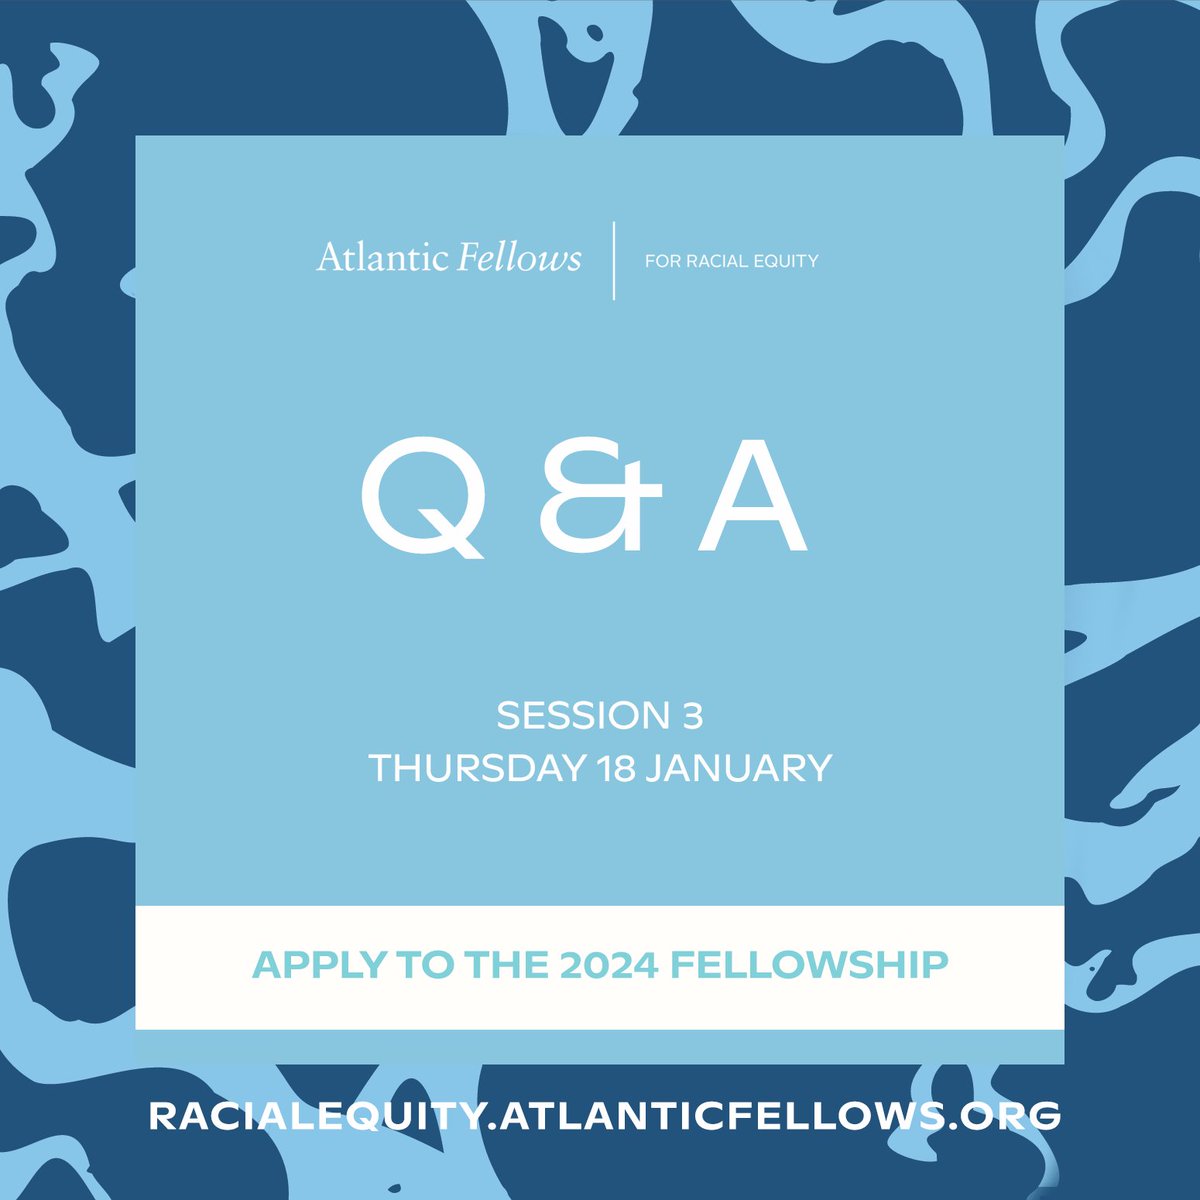 The final Q and A for our current call for applications holds this Thursday at 6PM CAT! Sign up for the call to have your questions about the Fellowship Experience and application process answered by our team: racialequity.atlanticfellows.org/events